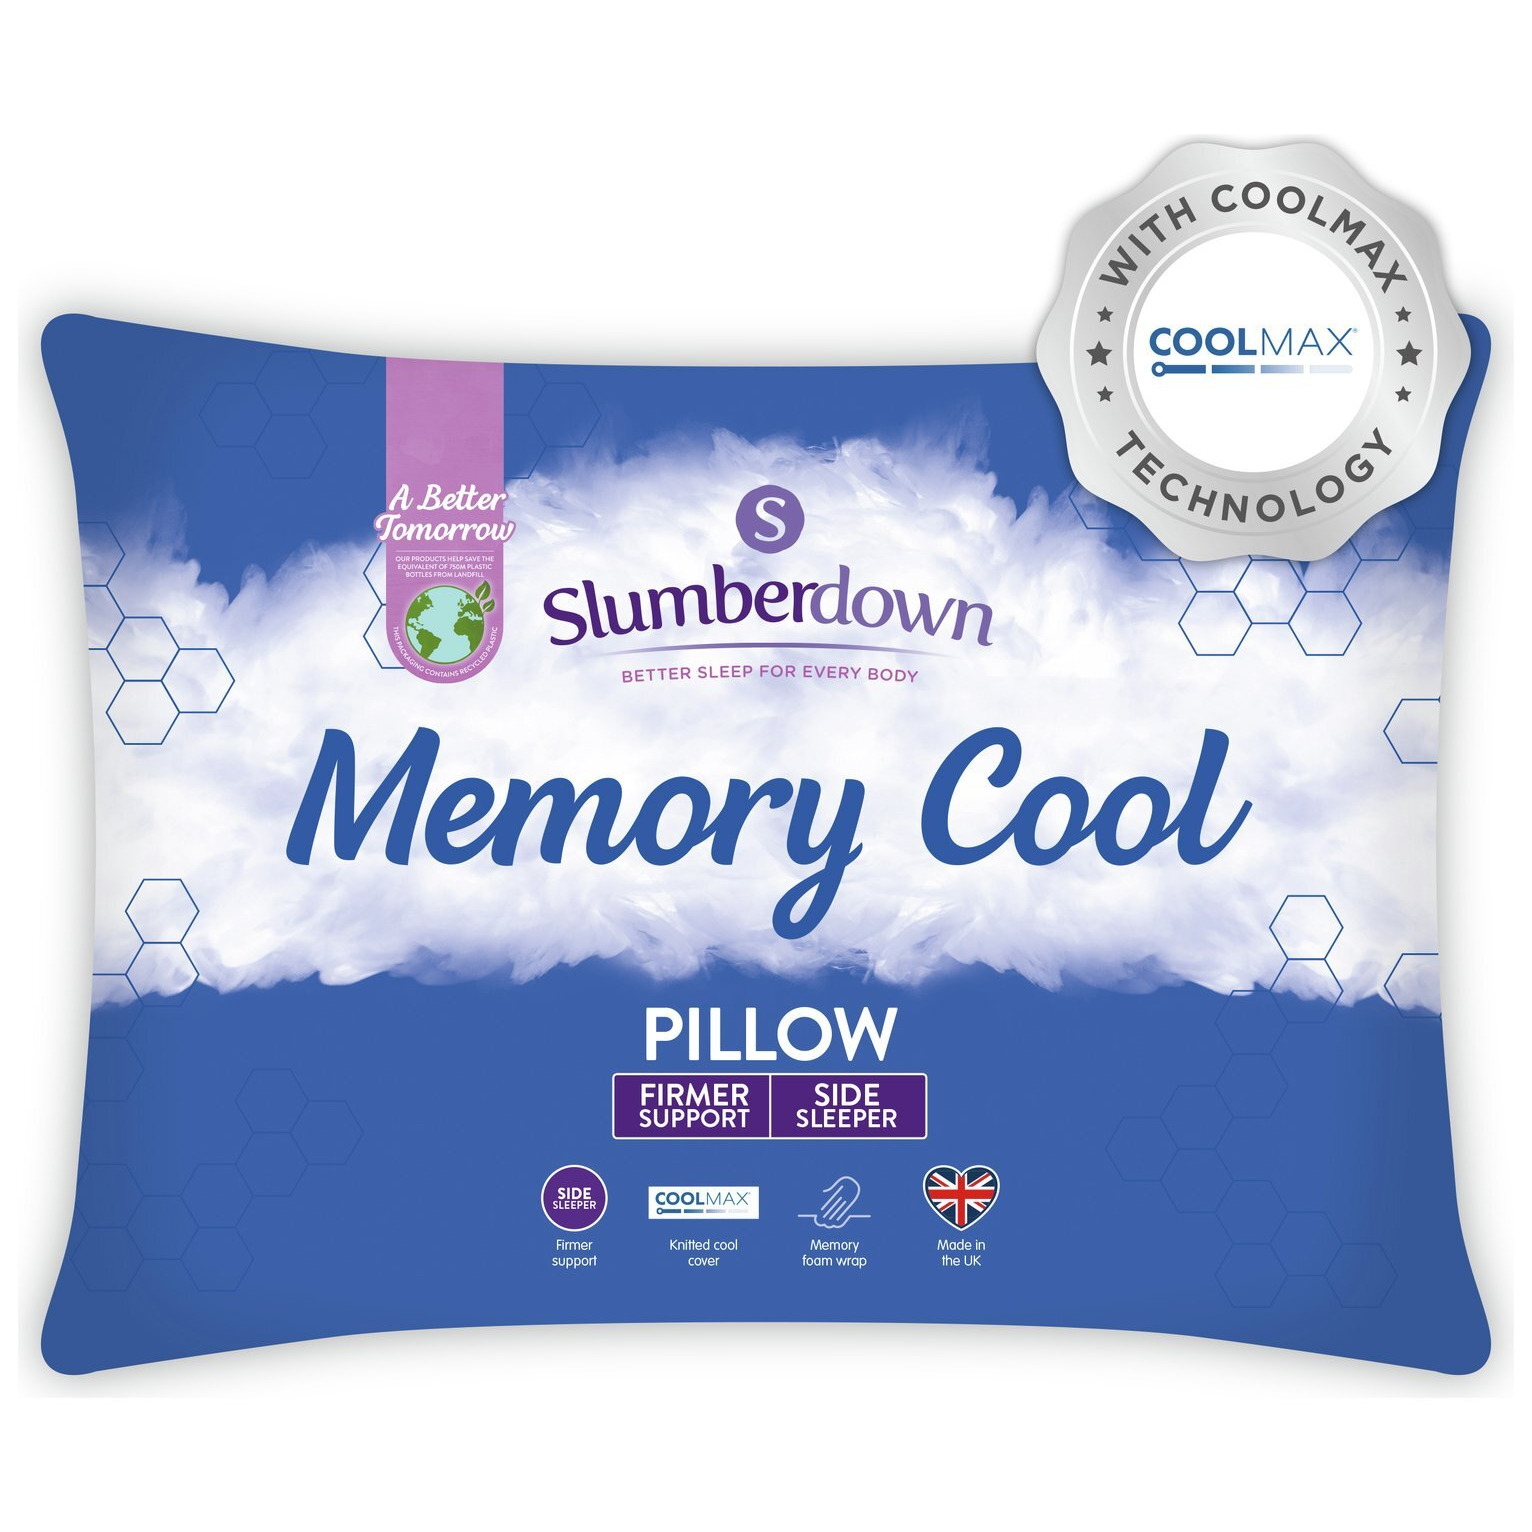 Slumberdown Cool Max Memory Support Firm Pillow - image 1